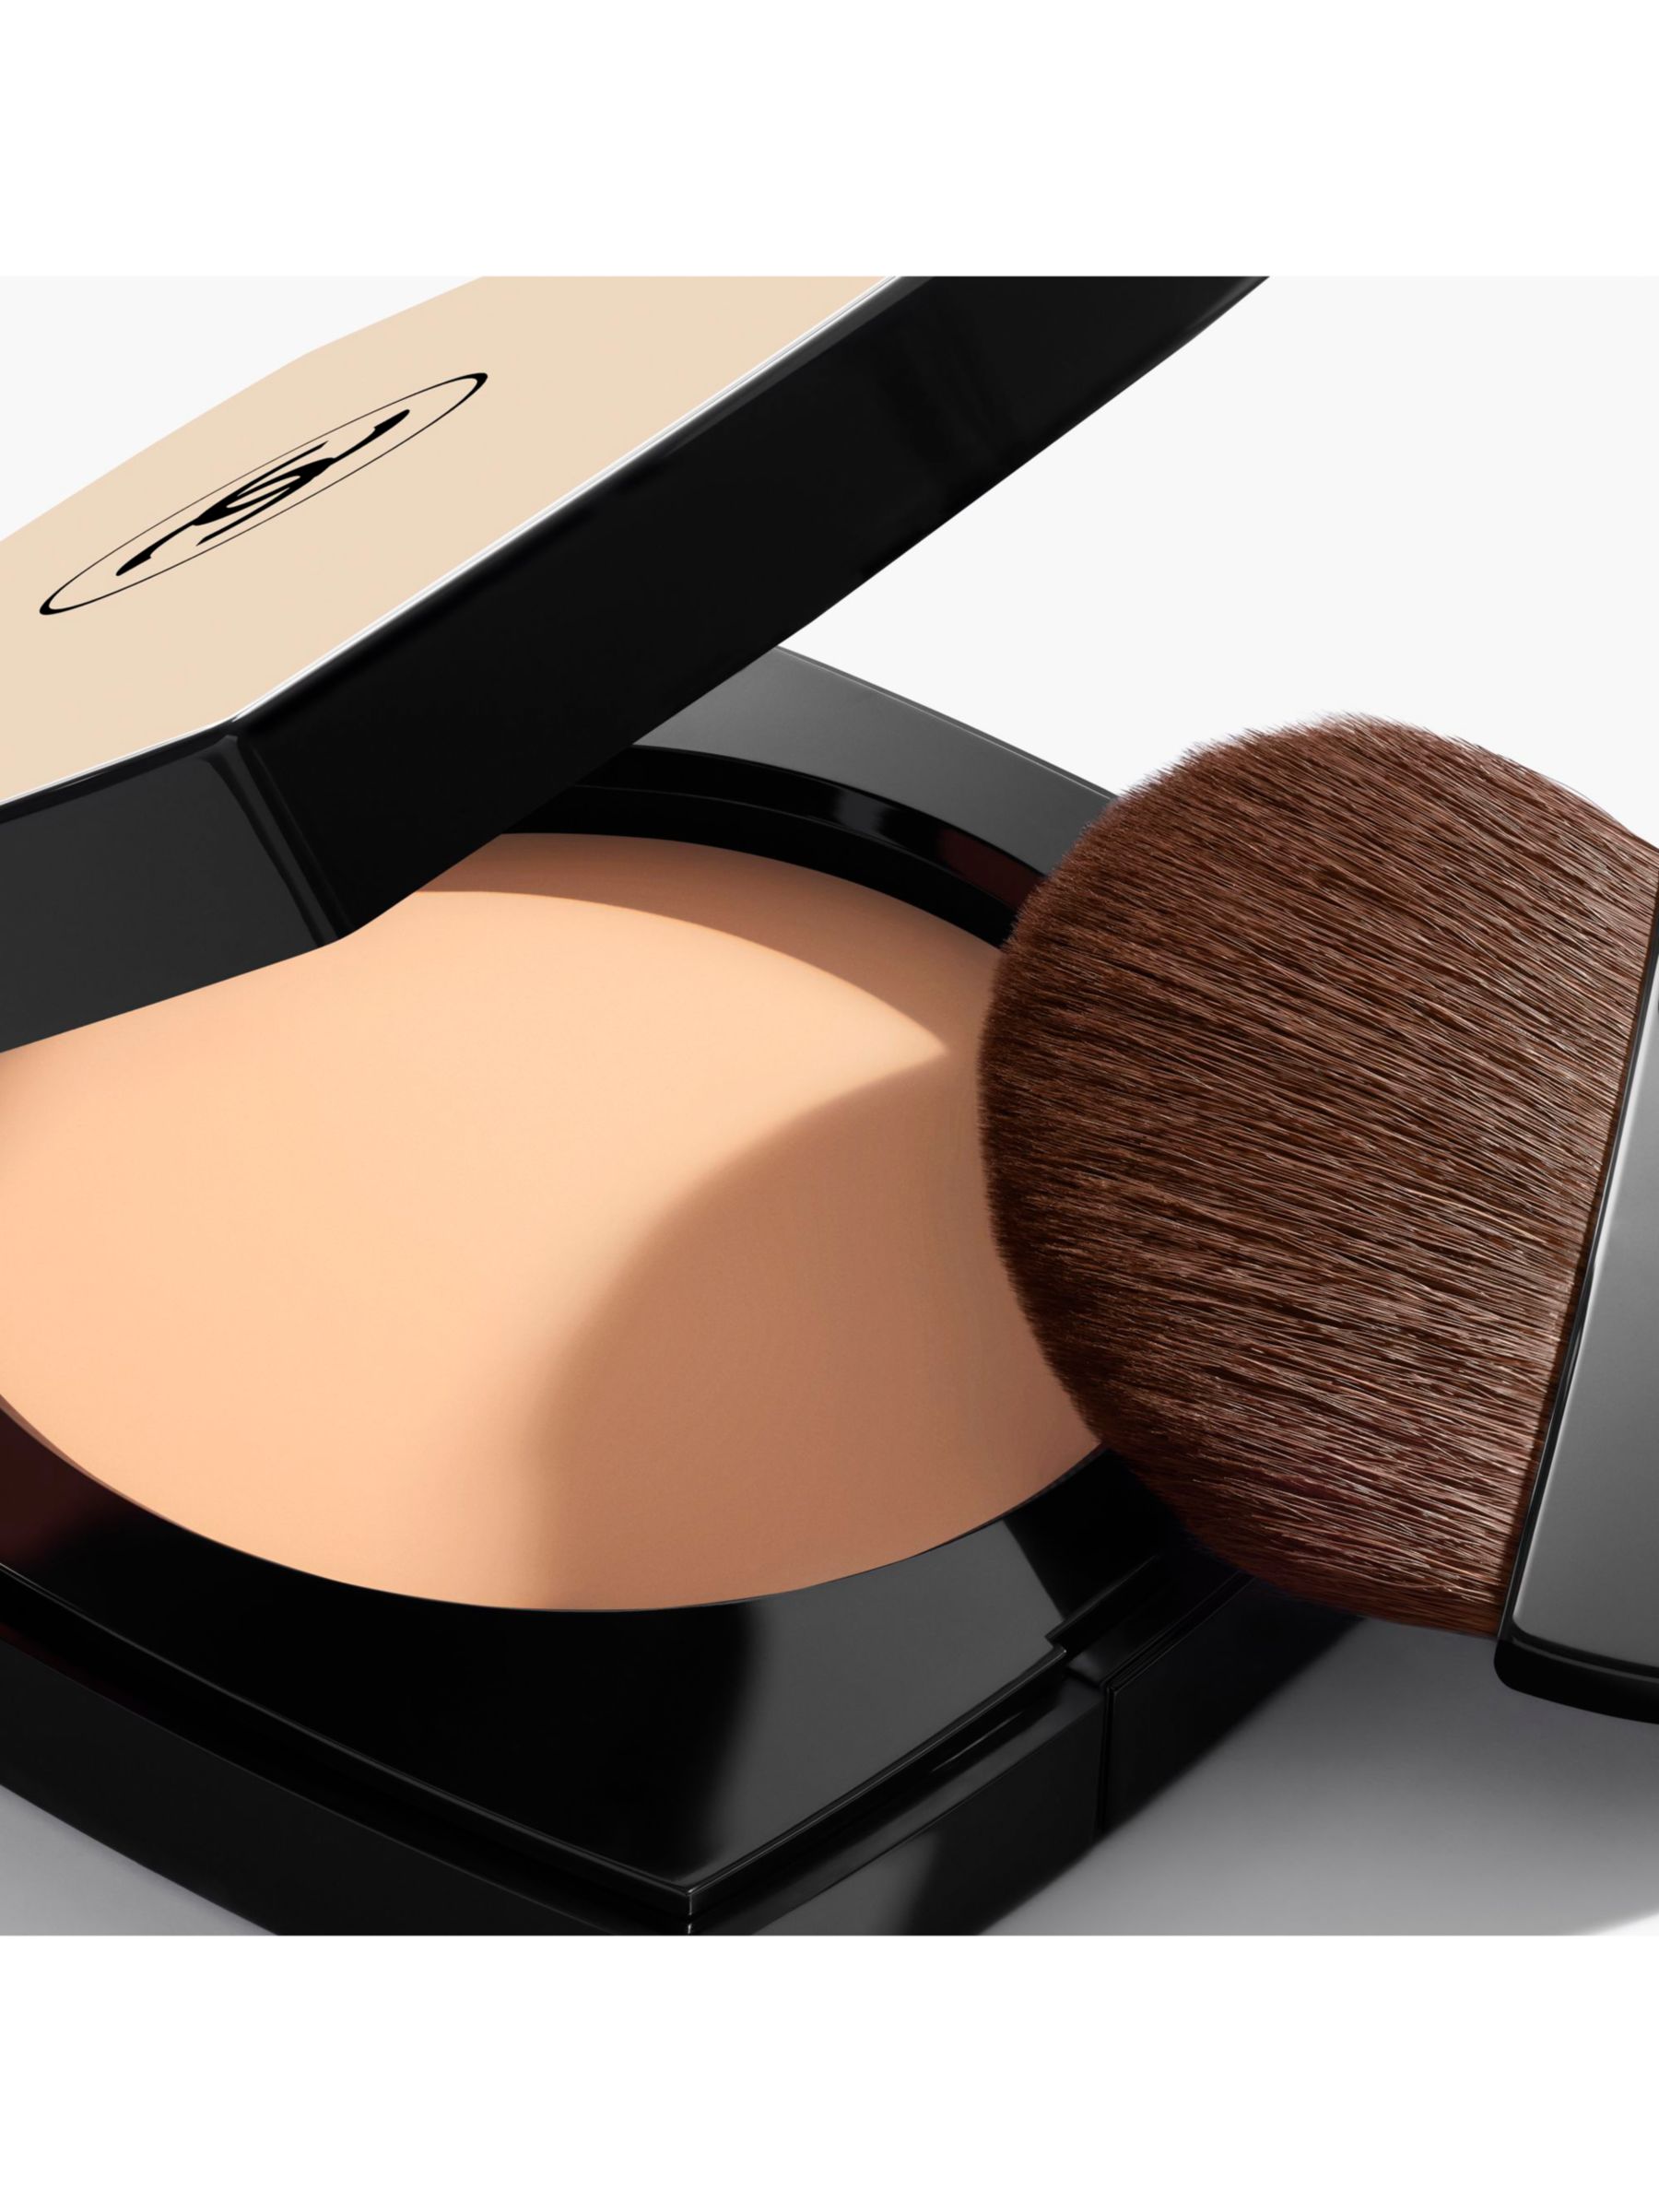 CHANEL Les Beiges Healthy Glow Powder, B20 at John Lewis & Partners